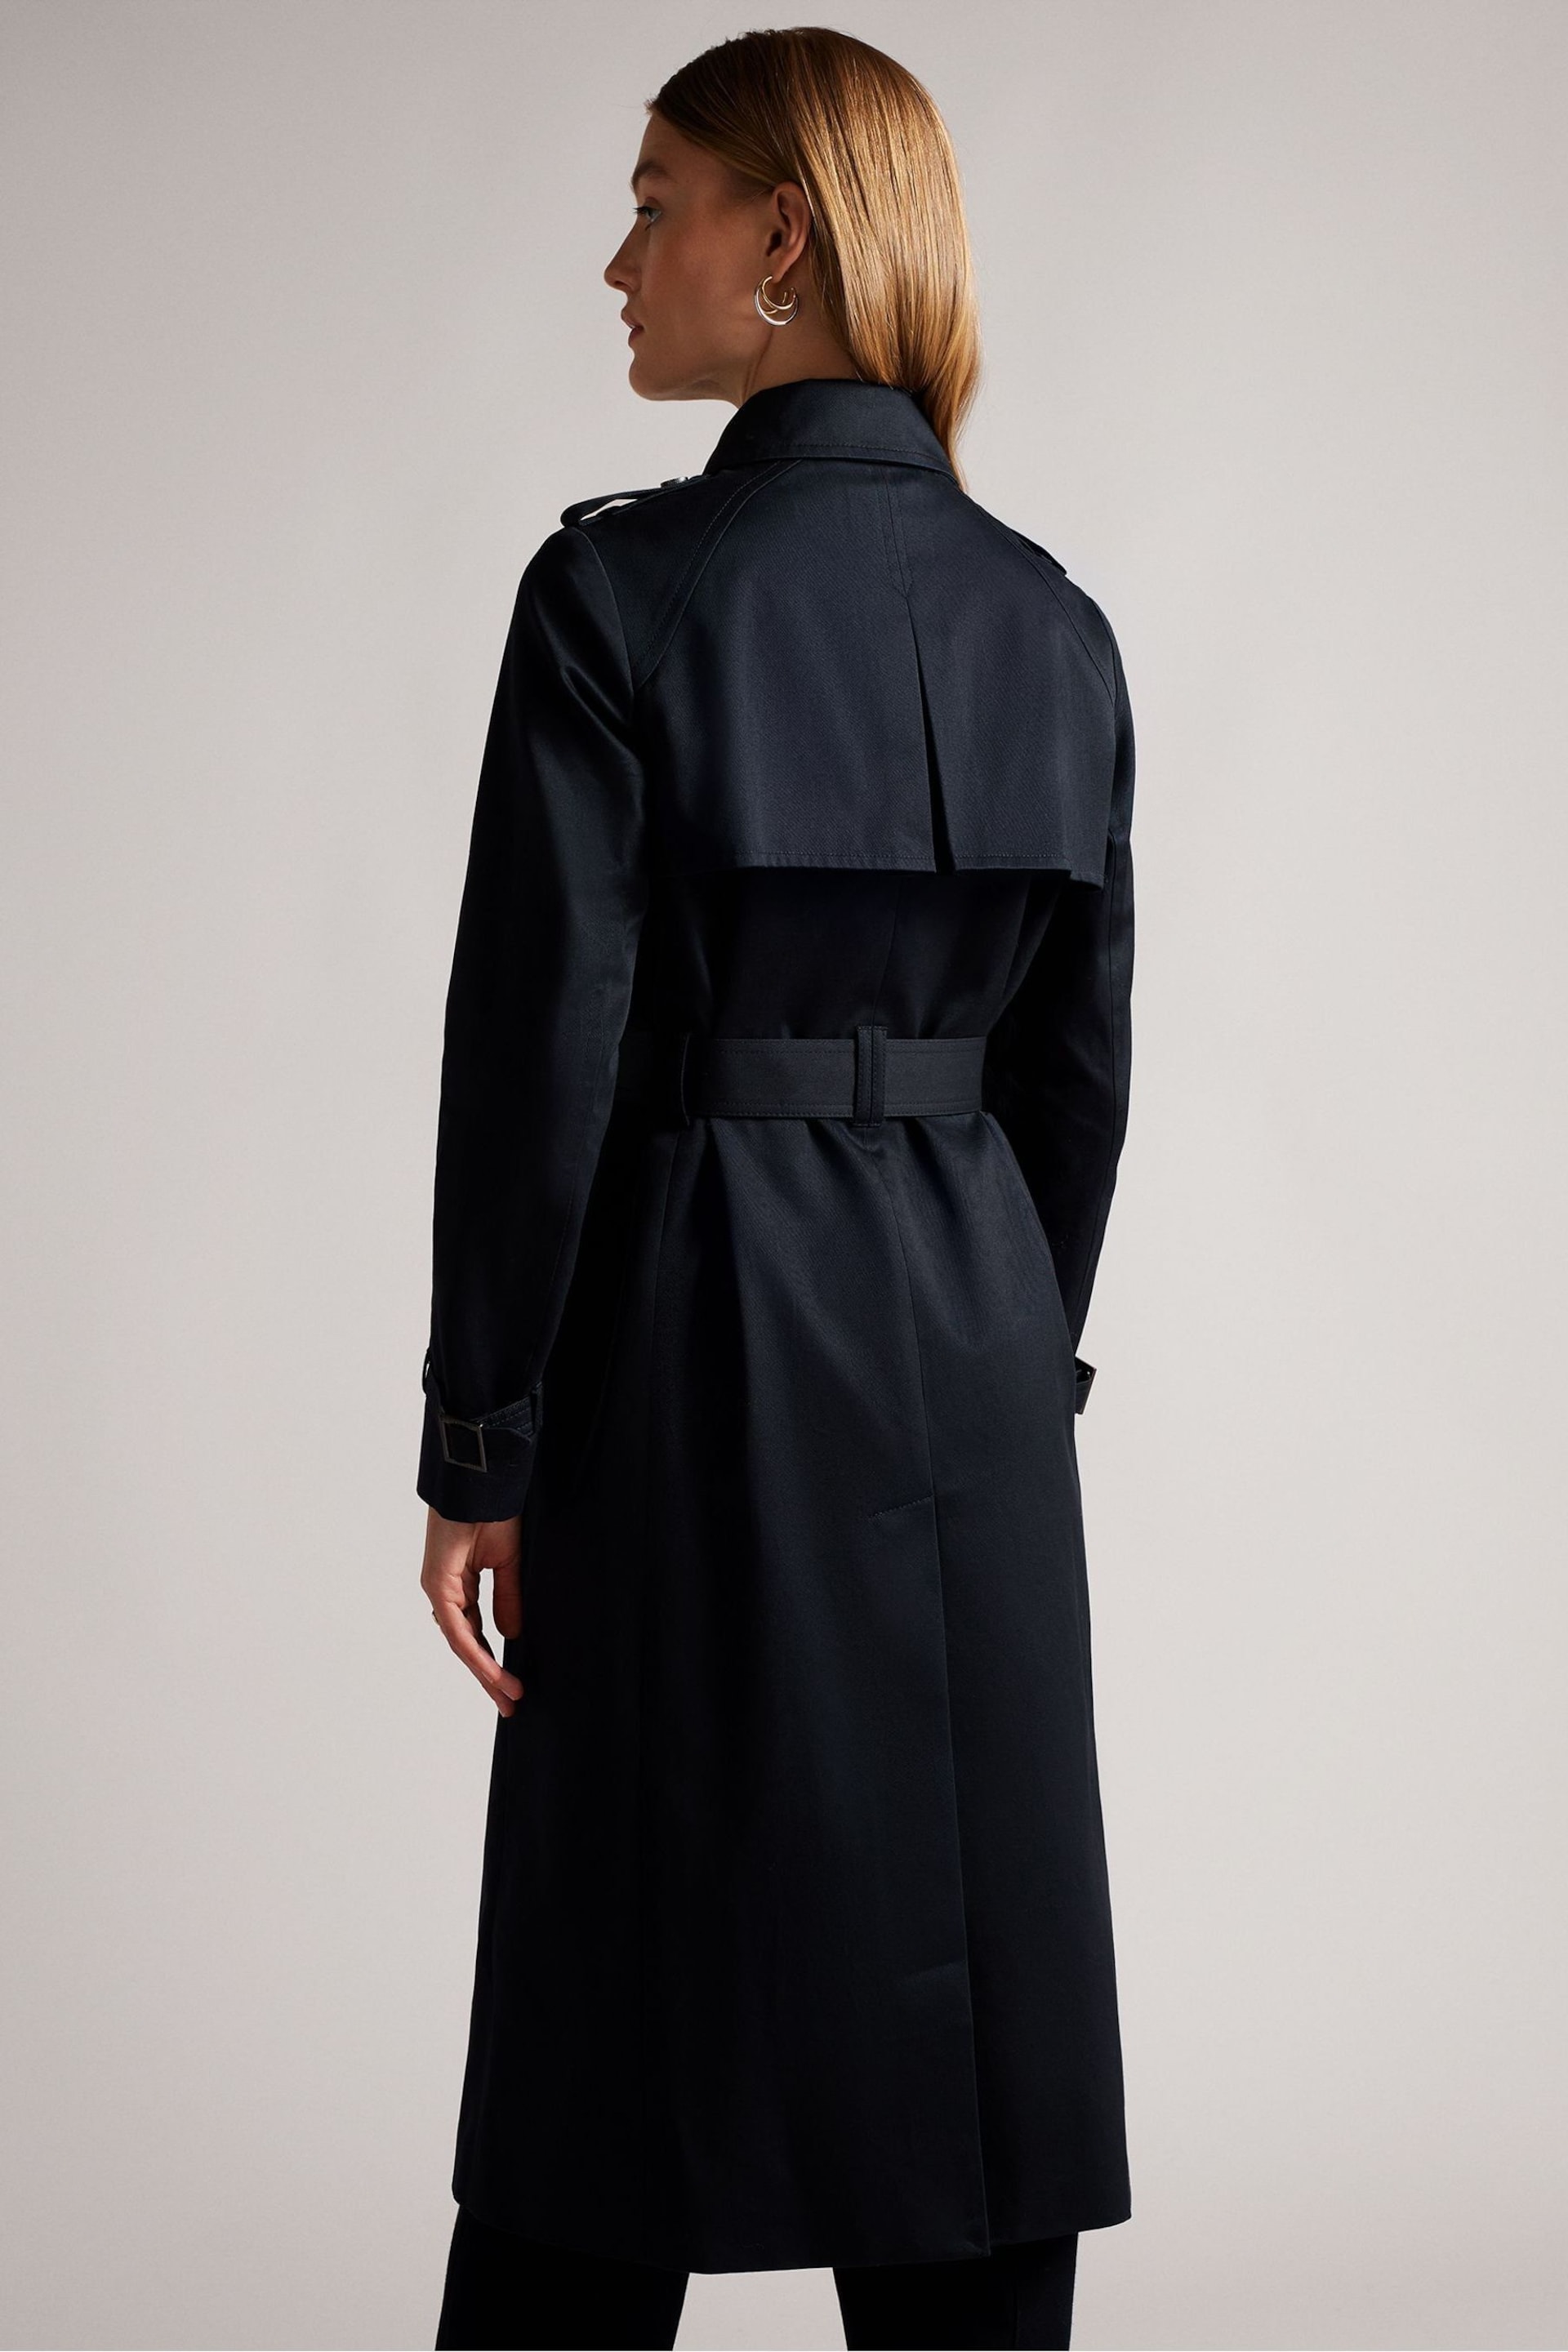 Ted Baker Blue Robbii Lightweight Trench Coat - Image 2 of 7